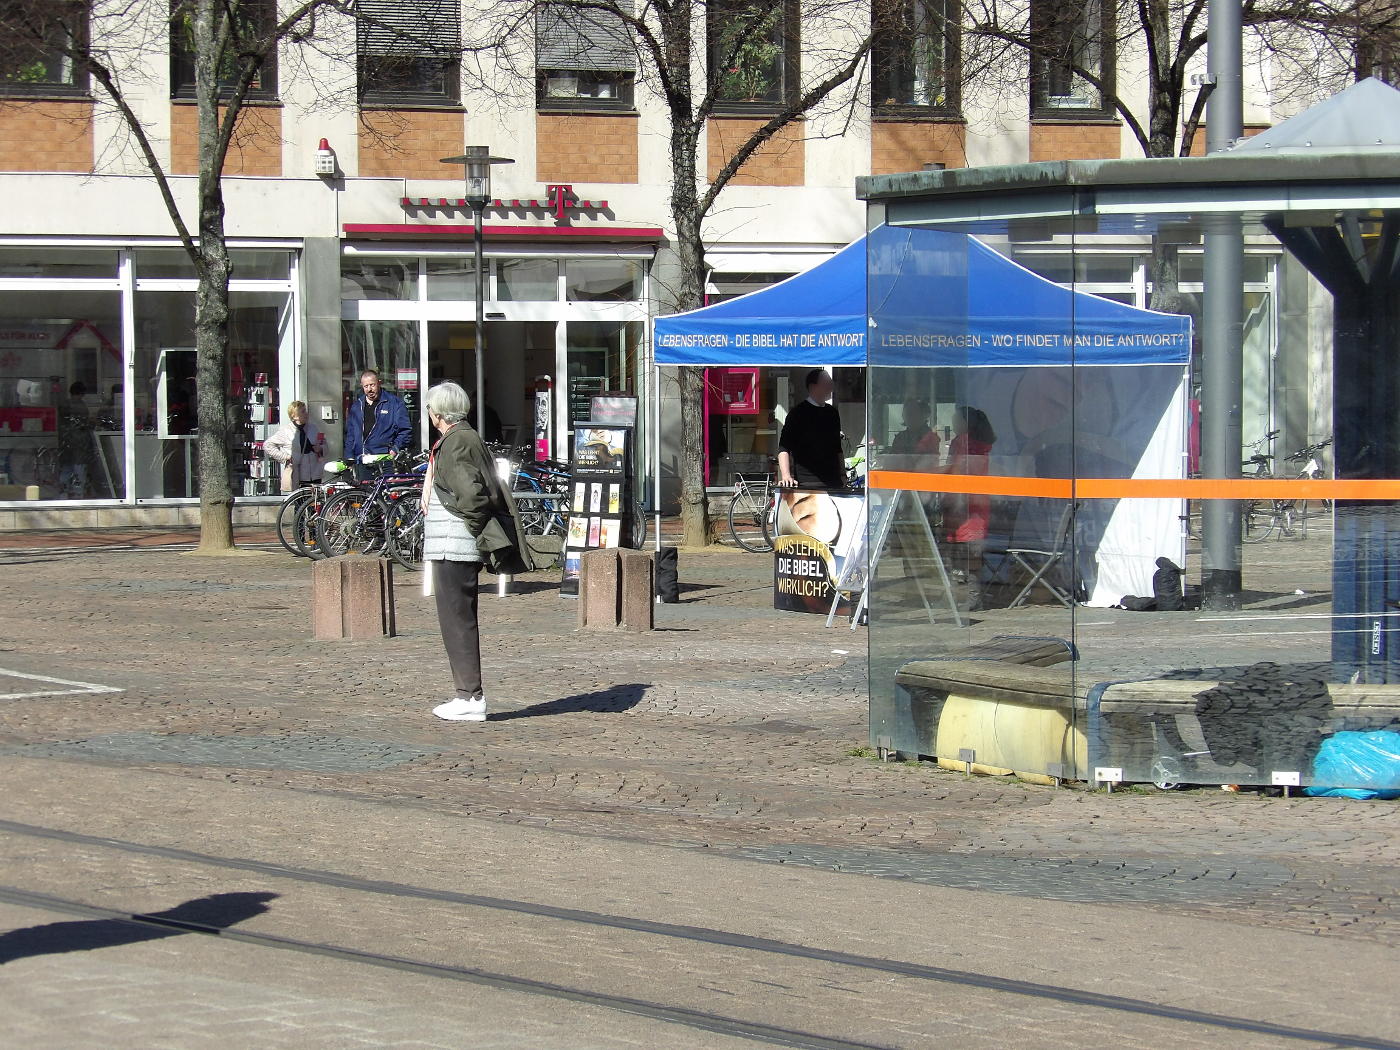 Darmstadt, the City of Mixed Population – Jehovah's Witnesses work on it internationally